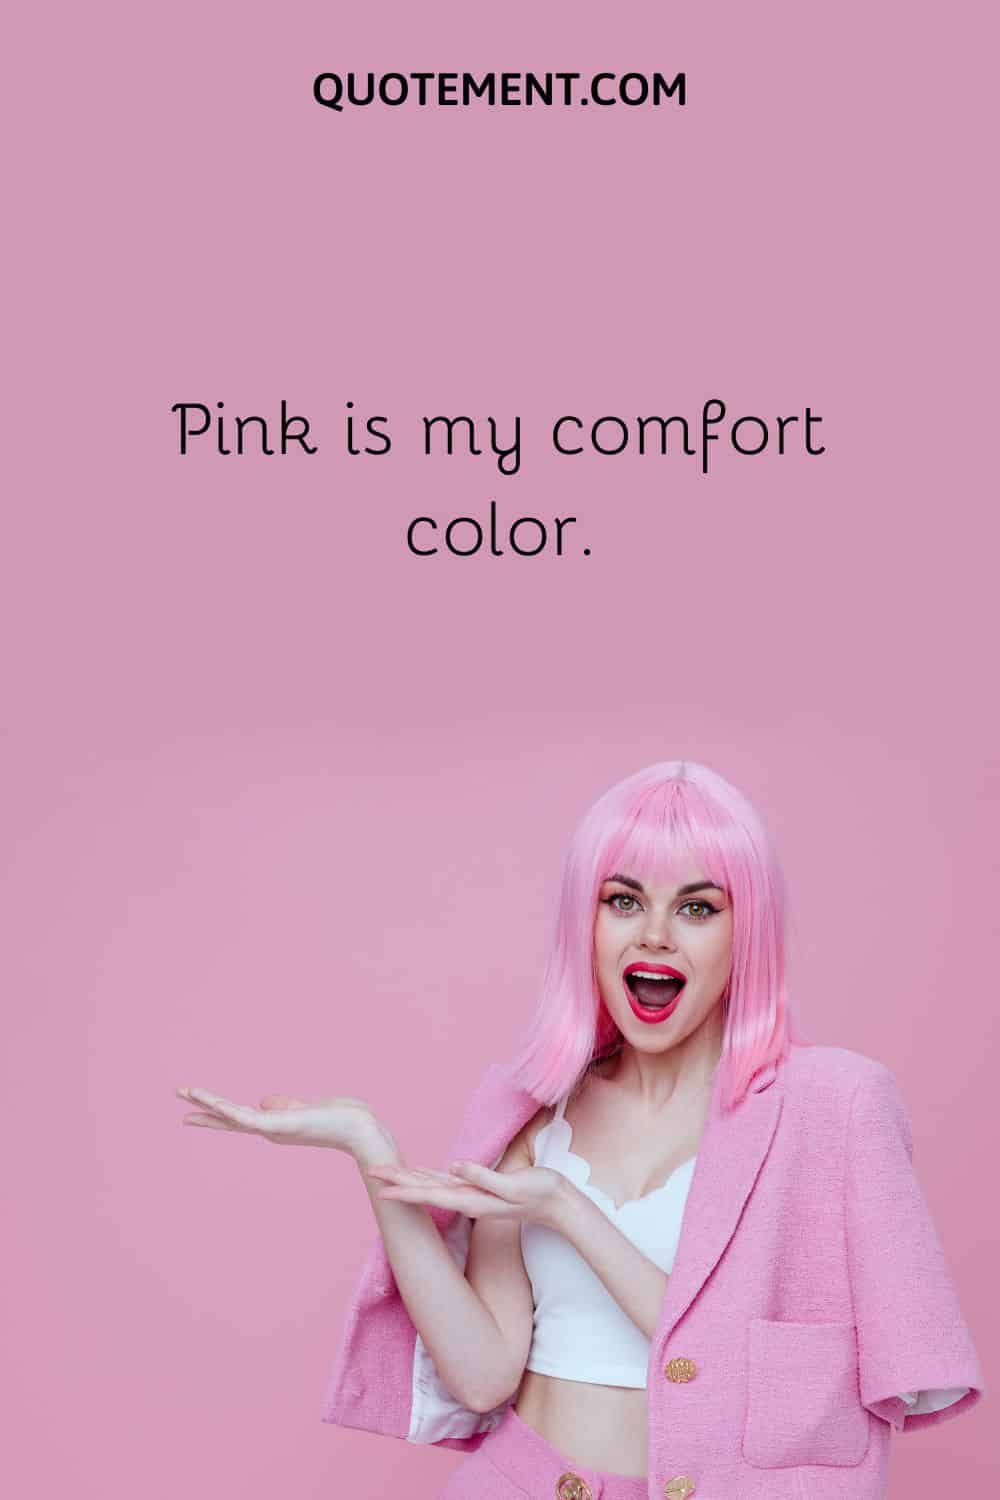  Pink is my comfort color.
